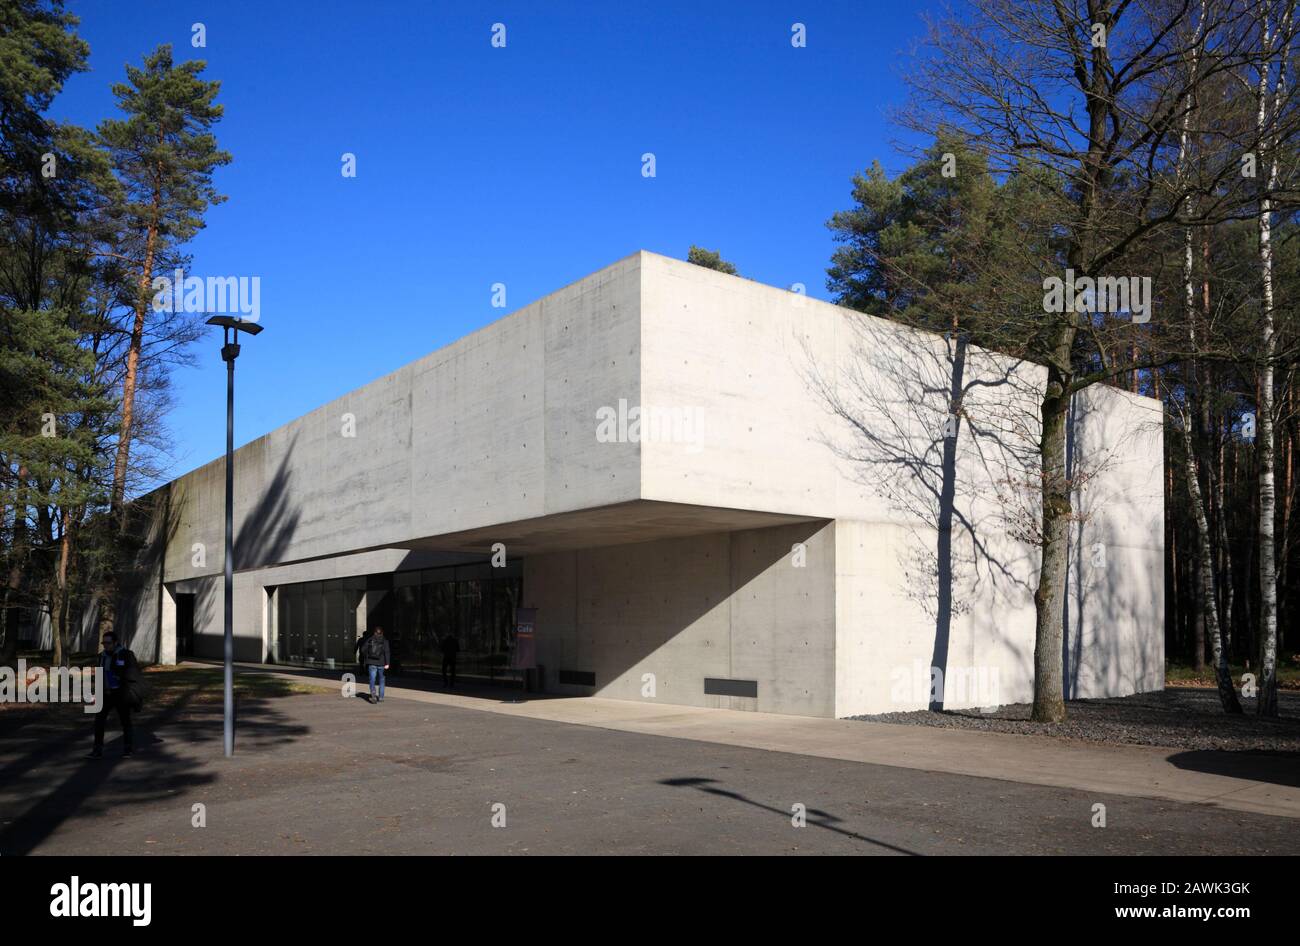 Documentation Center, Bergen-Belsen concentration camp memorial, Lower Saxony, Germany, Europe Stock Photo